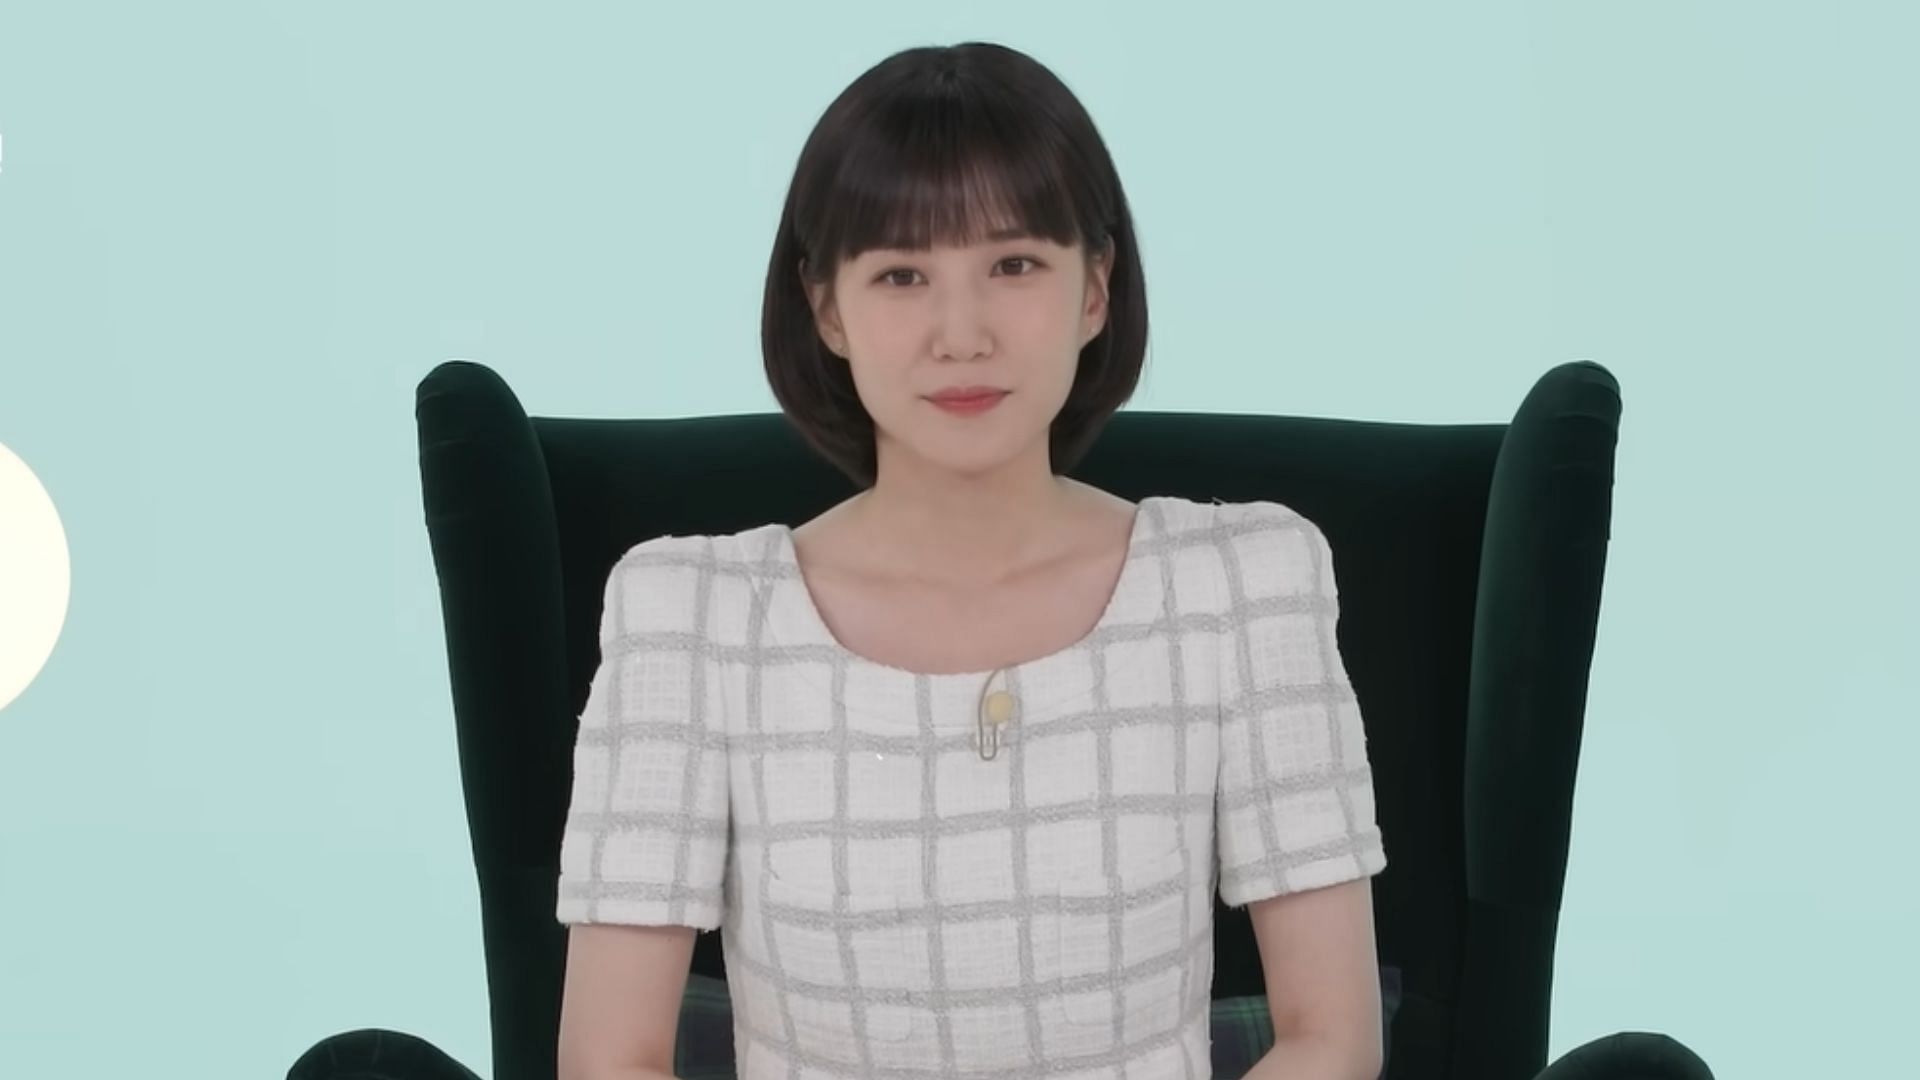 Park Eun-bin opens about the most challenging scenes of Extraordinary Attorney Woo (Image via YouTube/The Swoon)